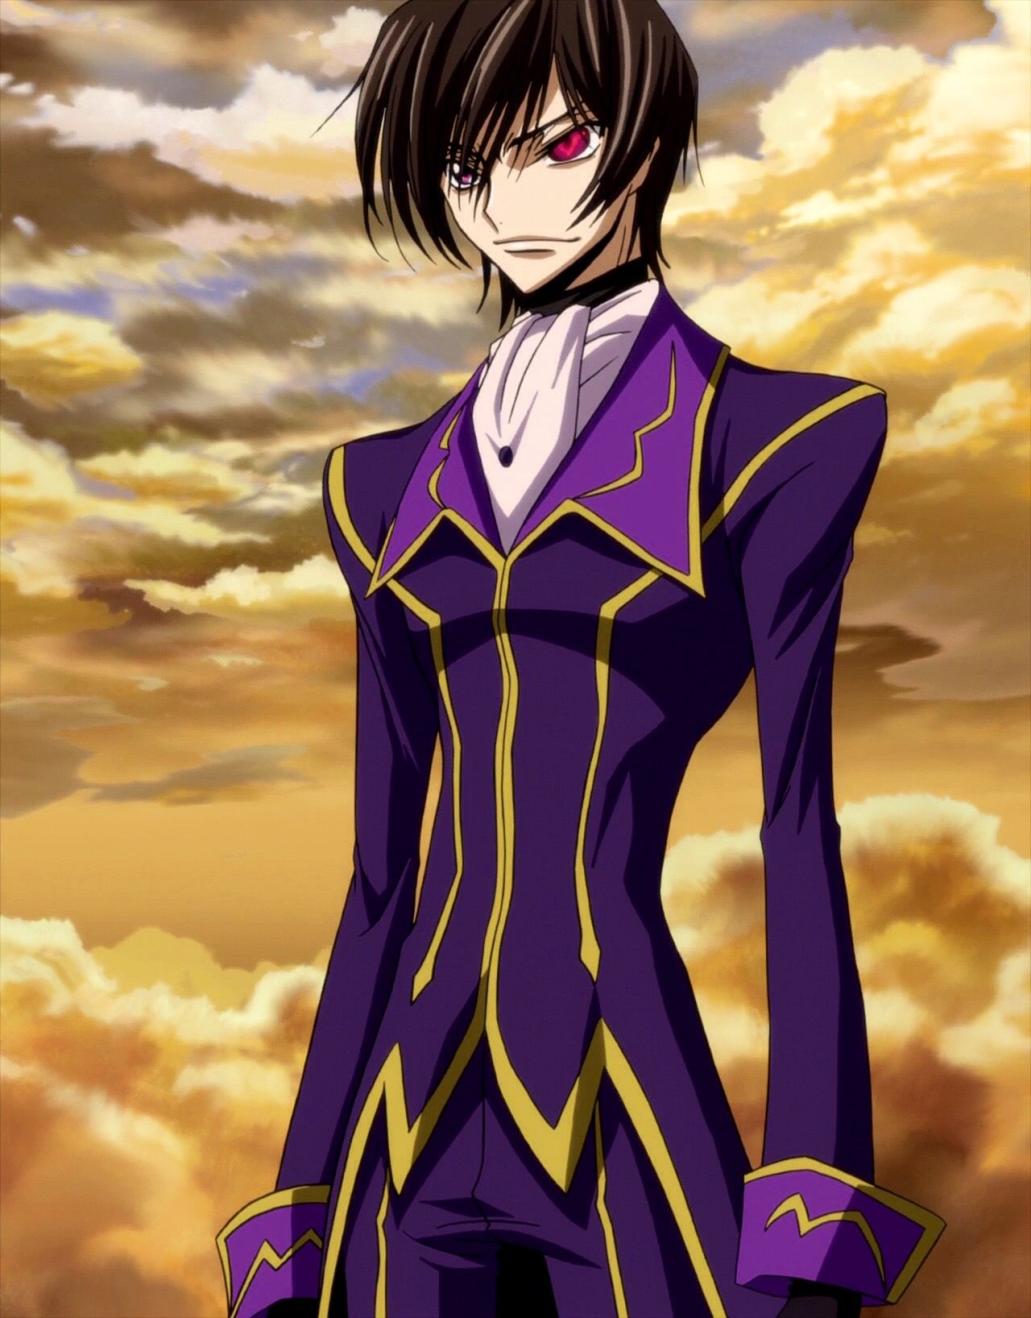 What Are The Similarities And Differences Between Lelouch And His Father, Charles Zi Britannia?